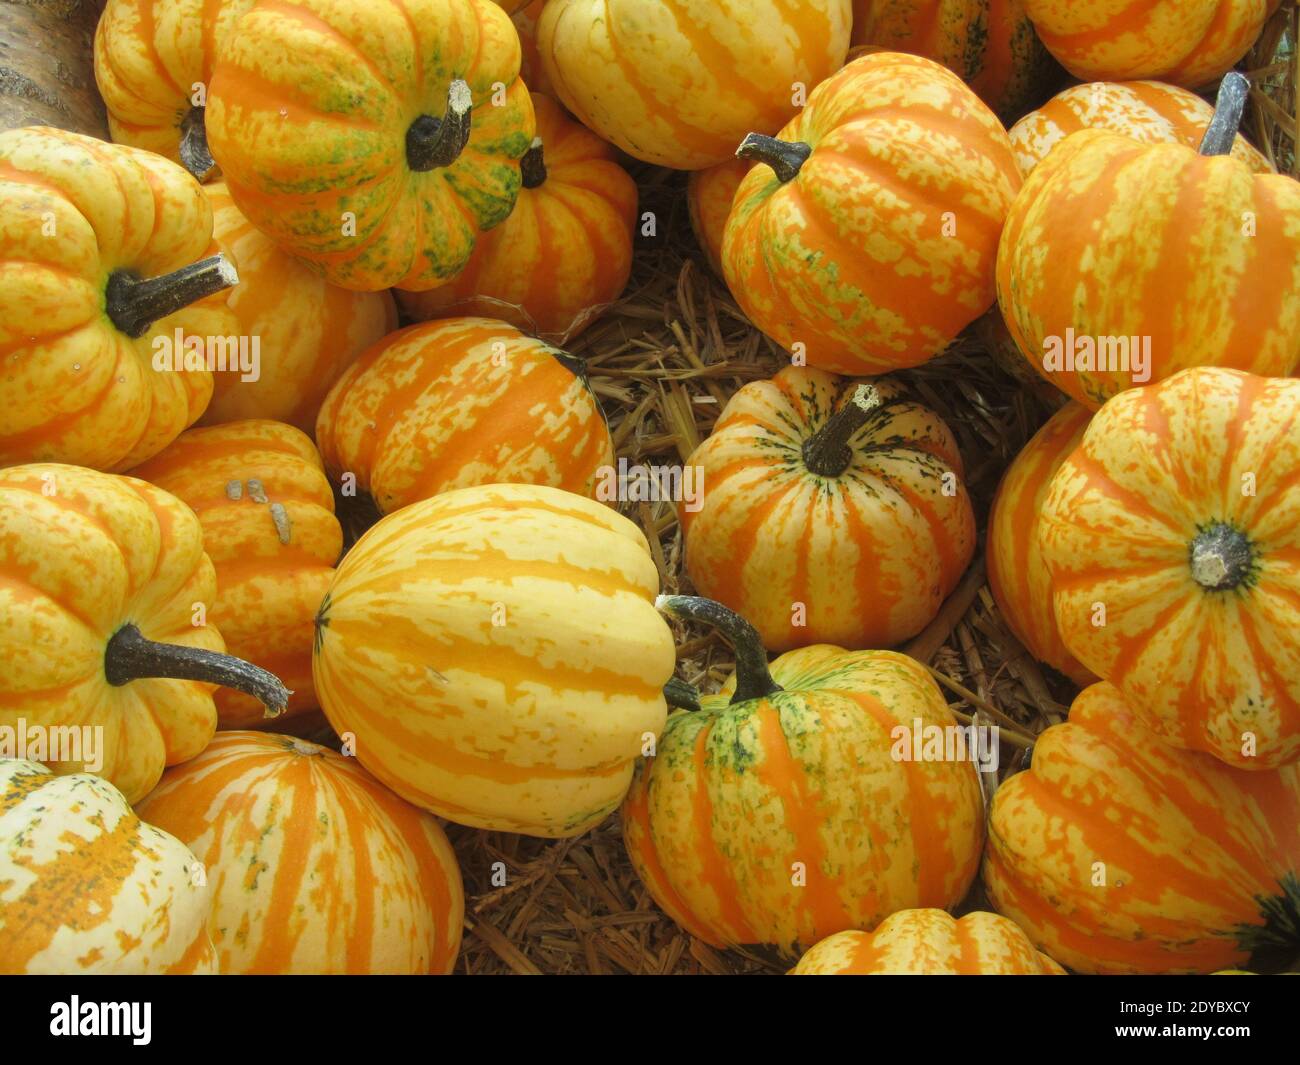 The new harvest of pumpkins is presented on a market stand at the end of August. Stock Photo